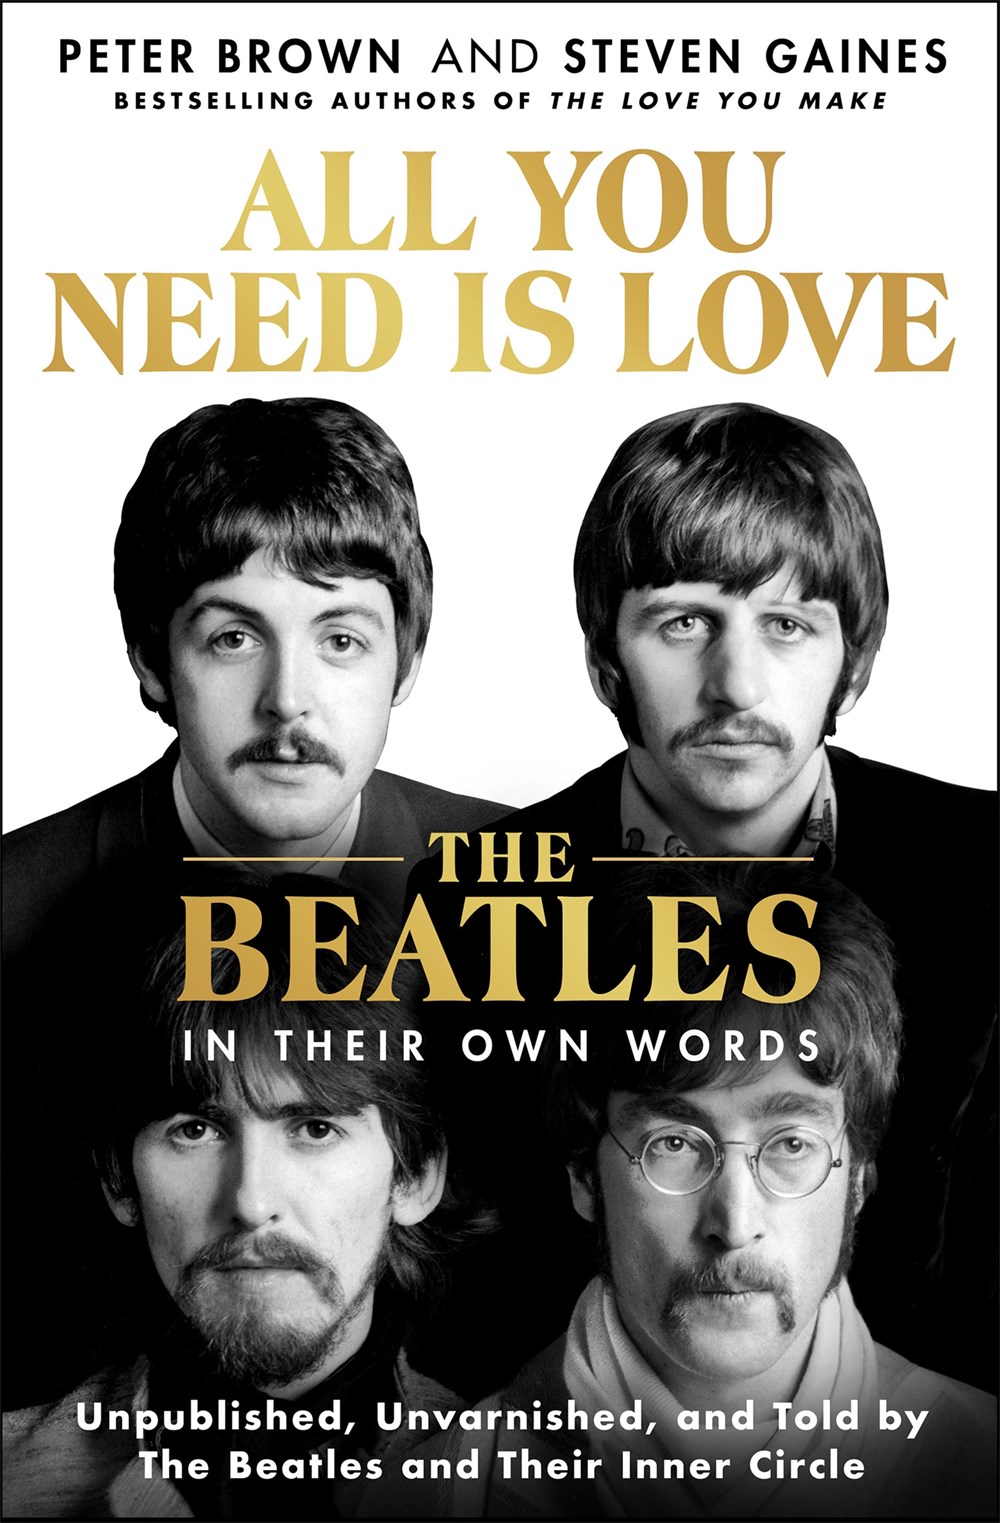 All You Need Is Love: An Oral History of the Beatles